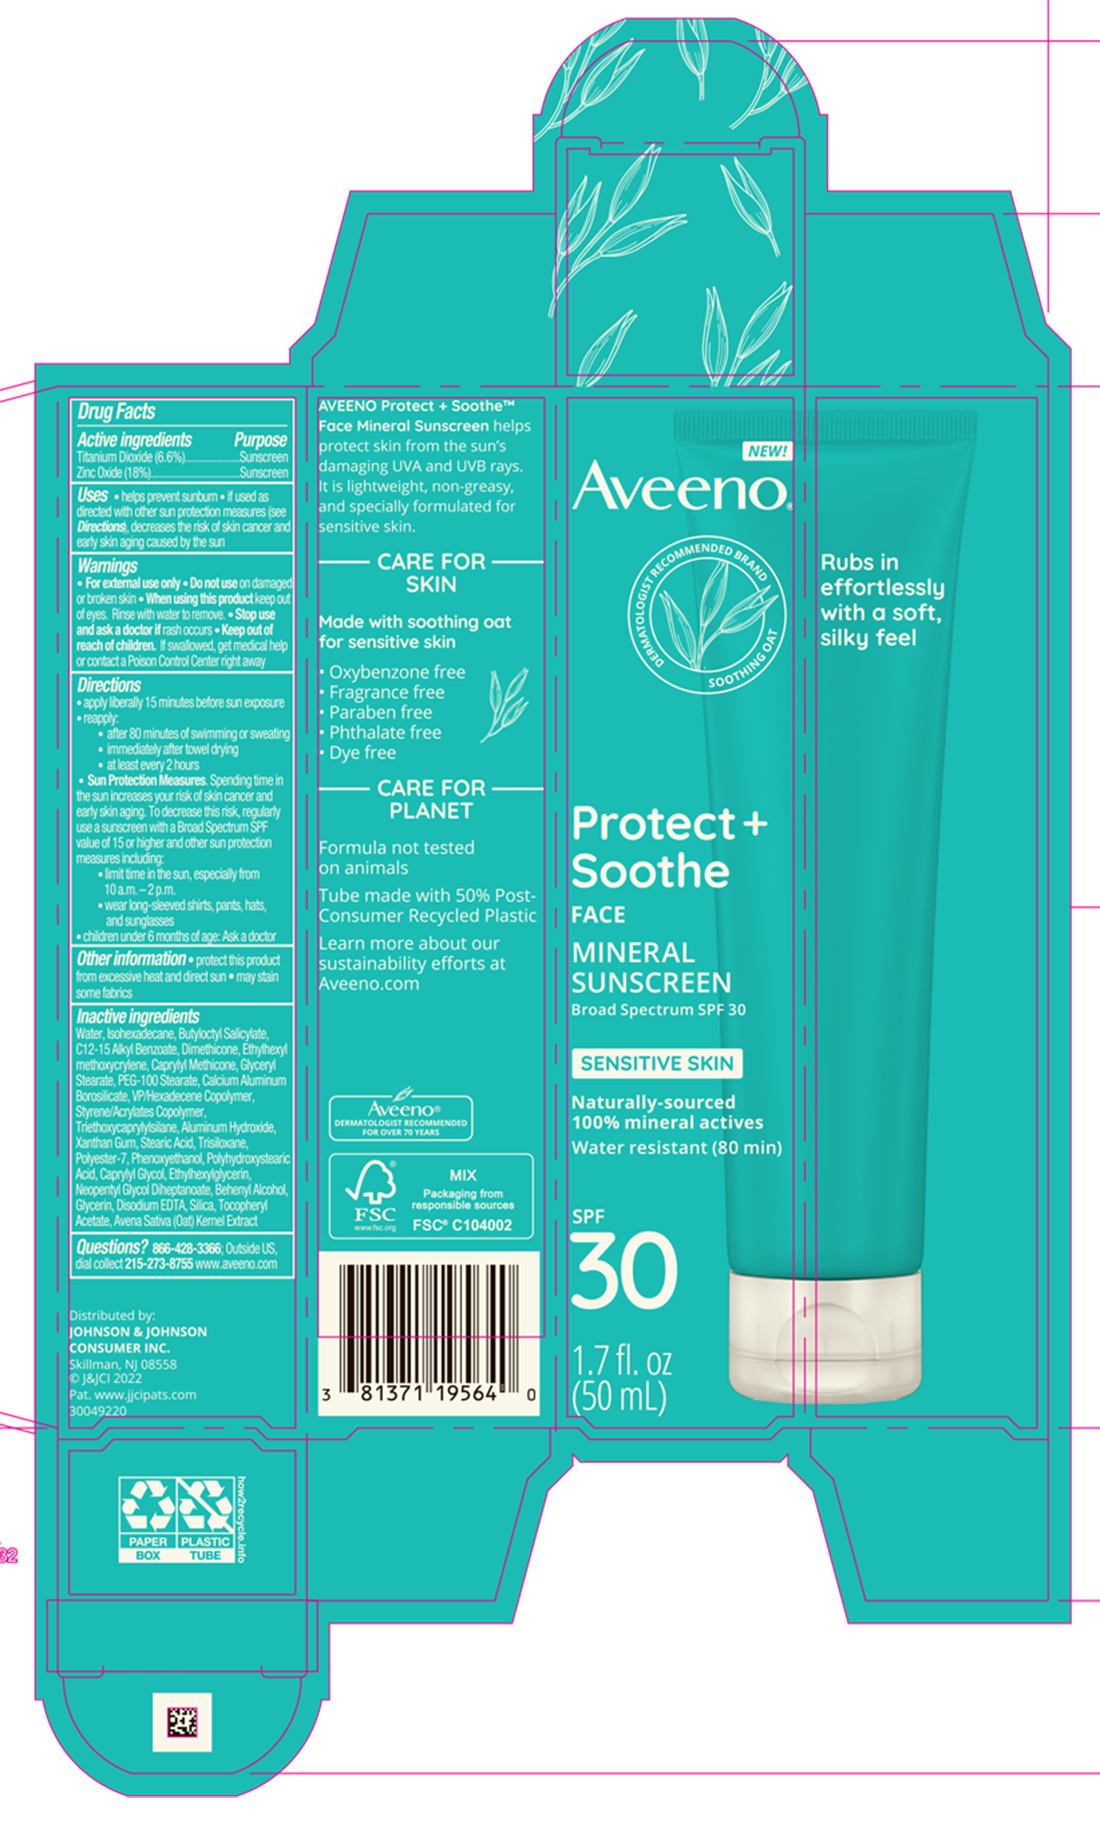 Aveeno Protect Plus Soothe Face Mineral Sunscreen SPF 30